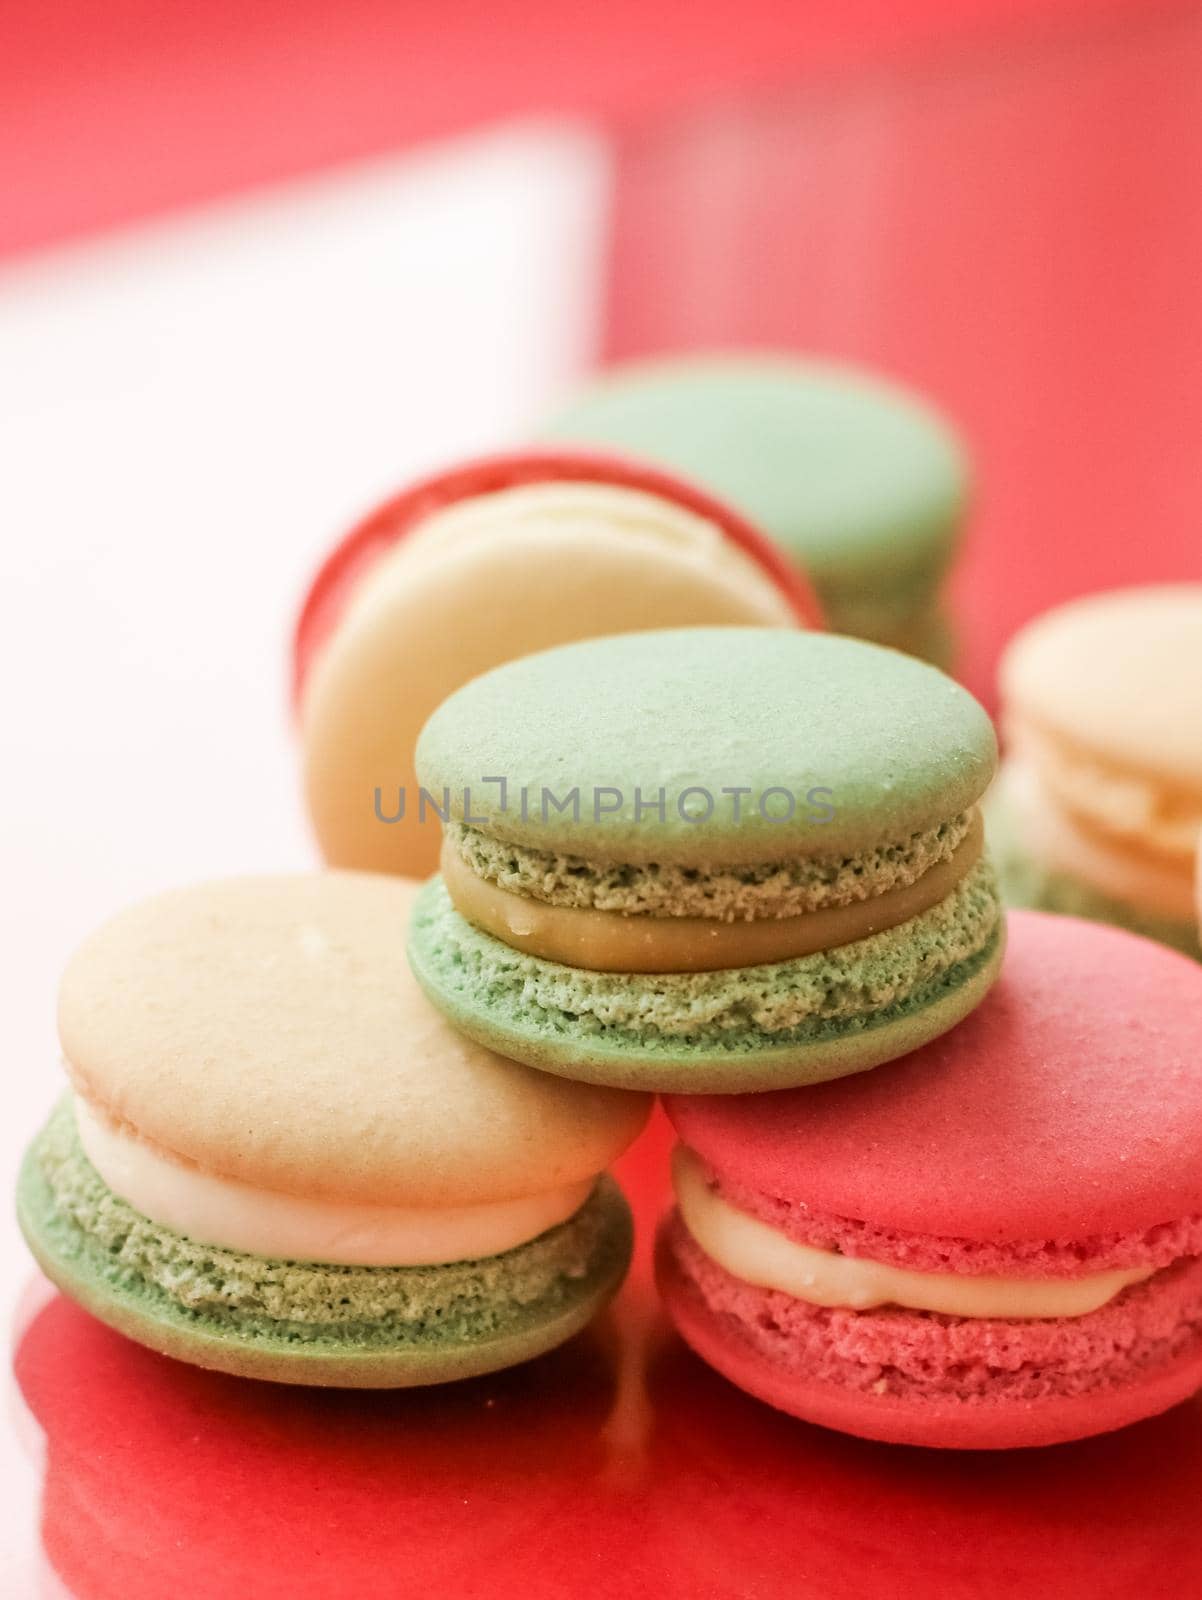 Pastry, bakery and branding concept - French macaroons on fruity red background, parisian chic cafe dessert, sweet food and cake macaron for luxury confectionery brand, holiday backdrop design